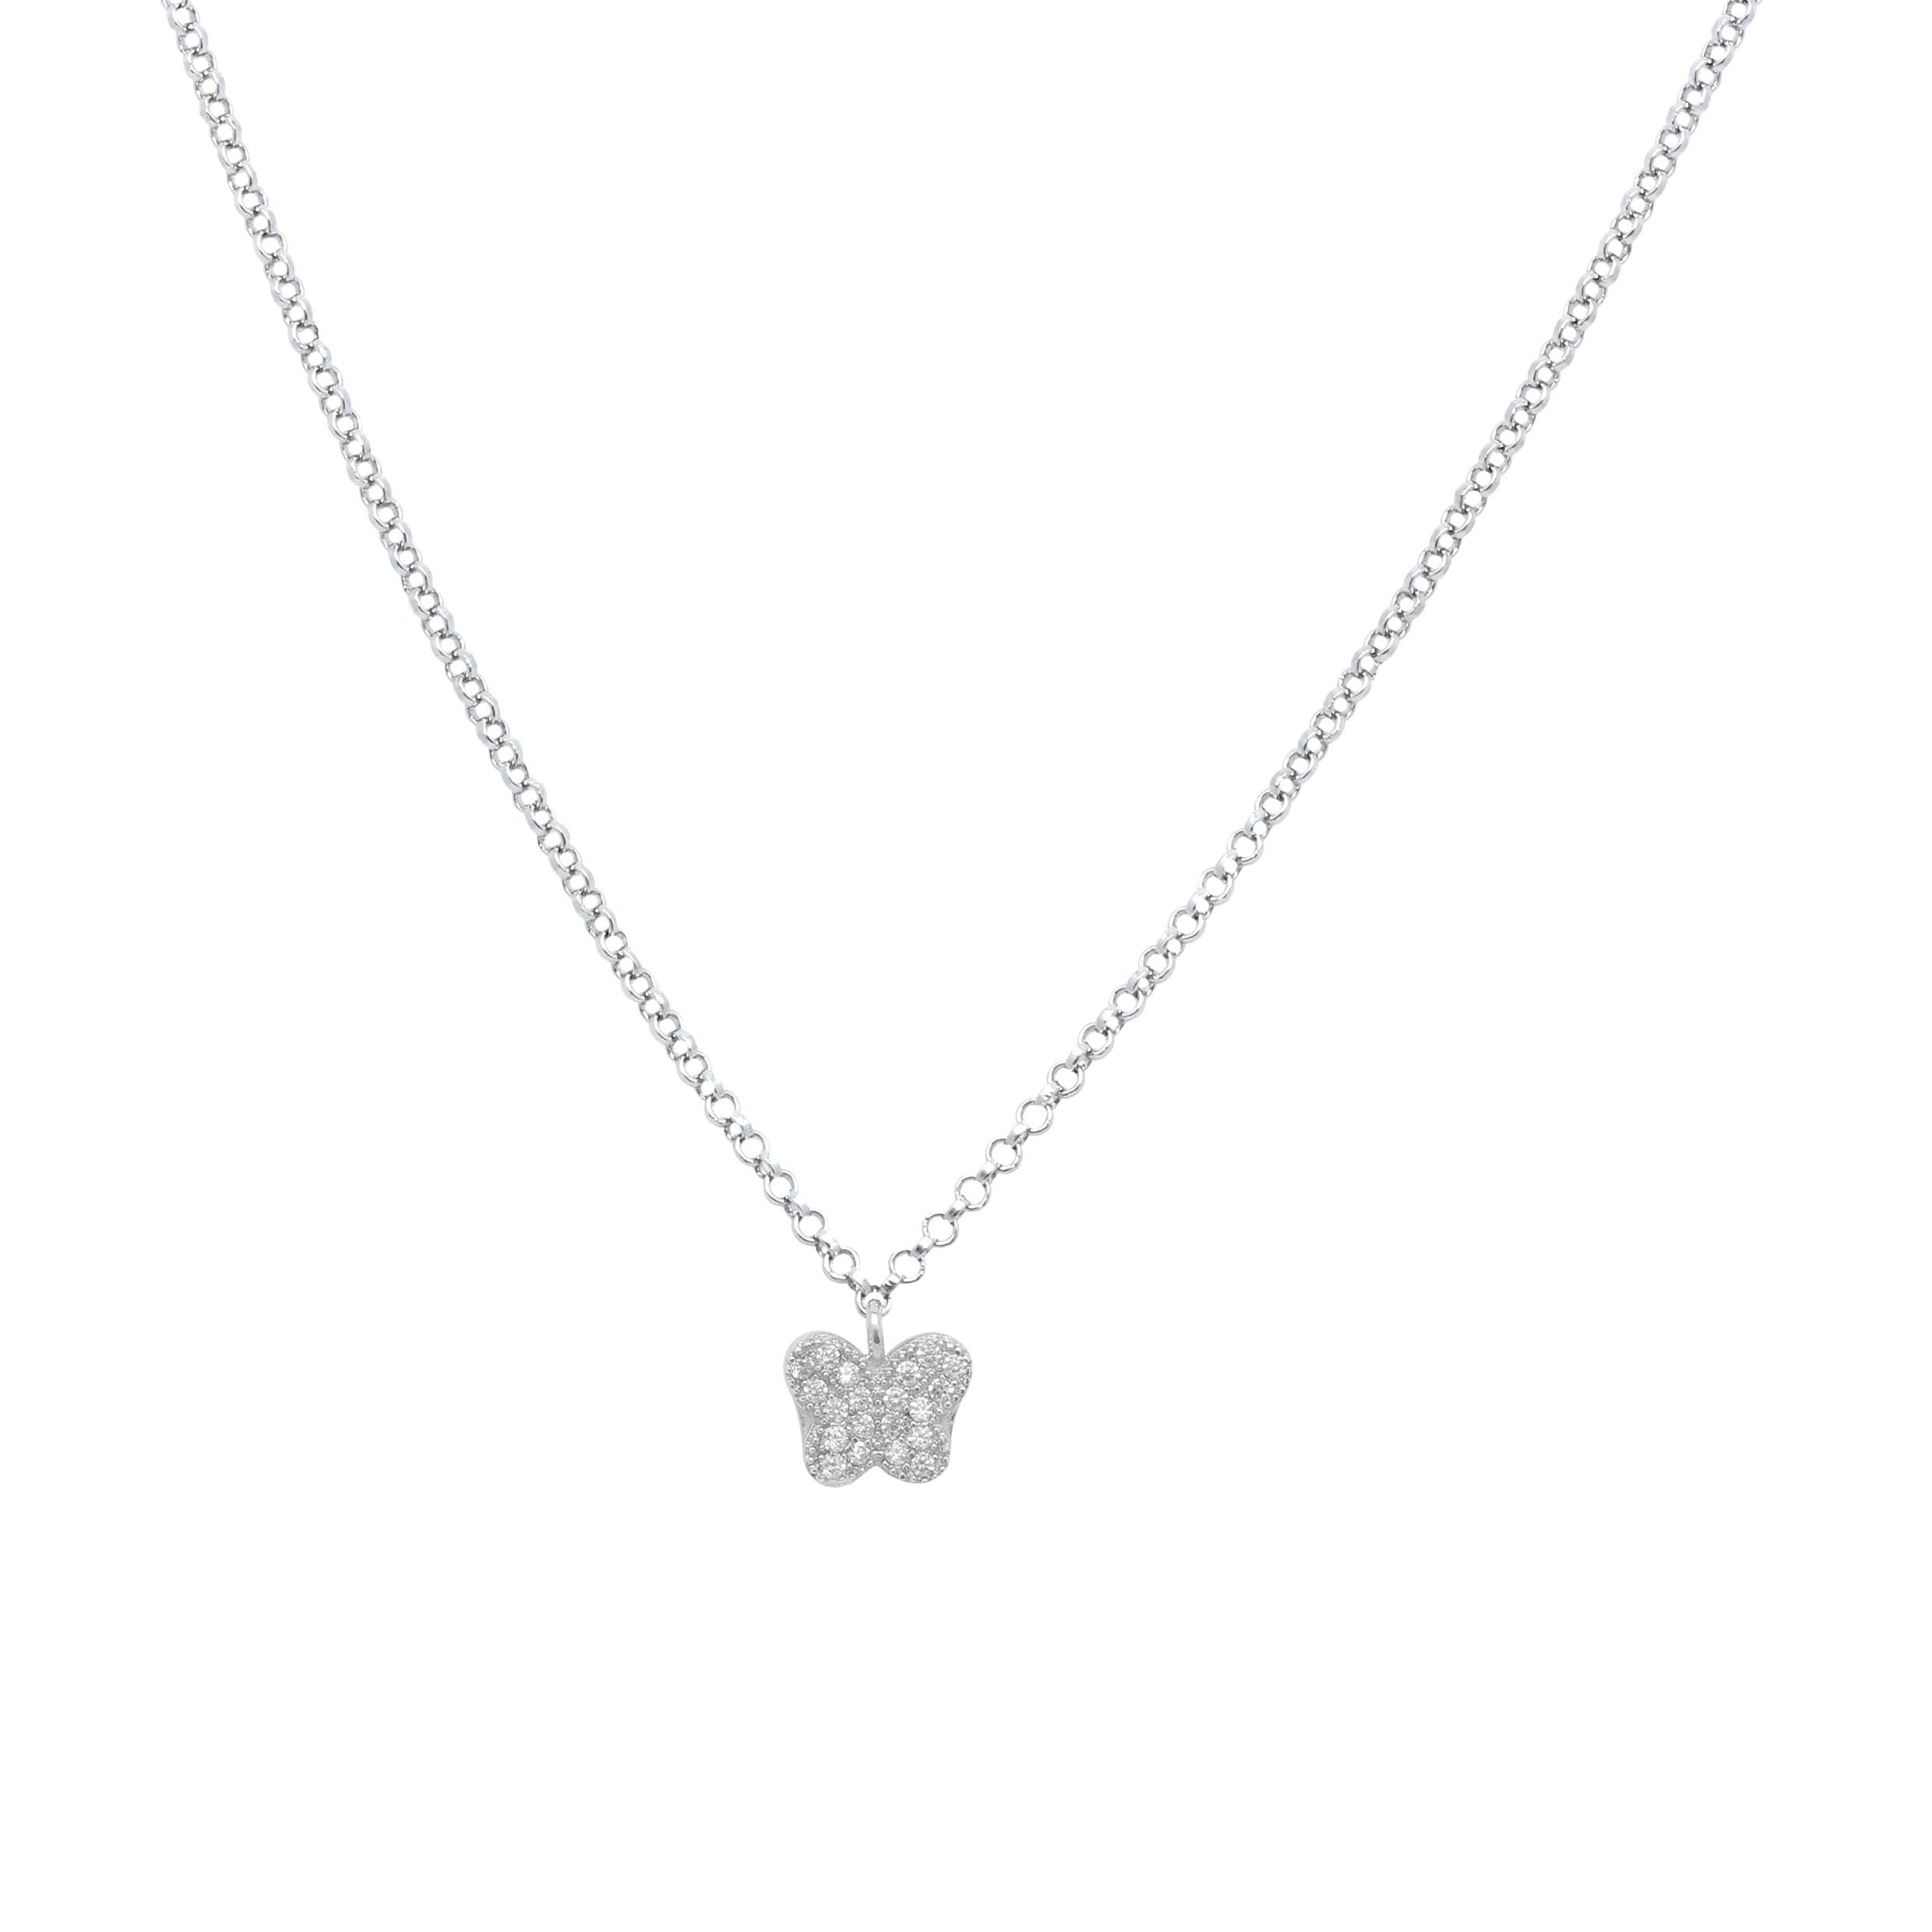 Butterfly Pendant Necklace in Sterling Silver with CZ Pavé